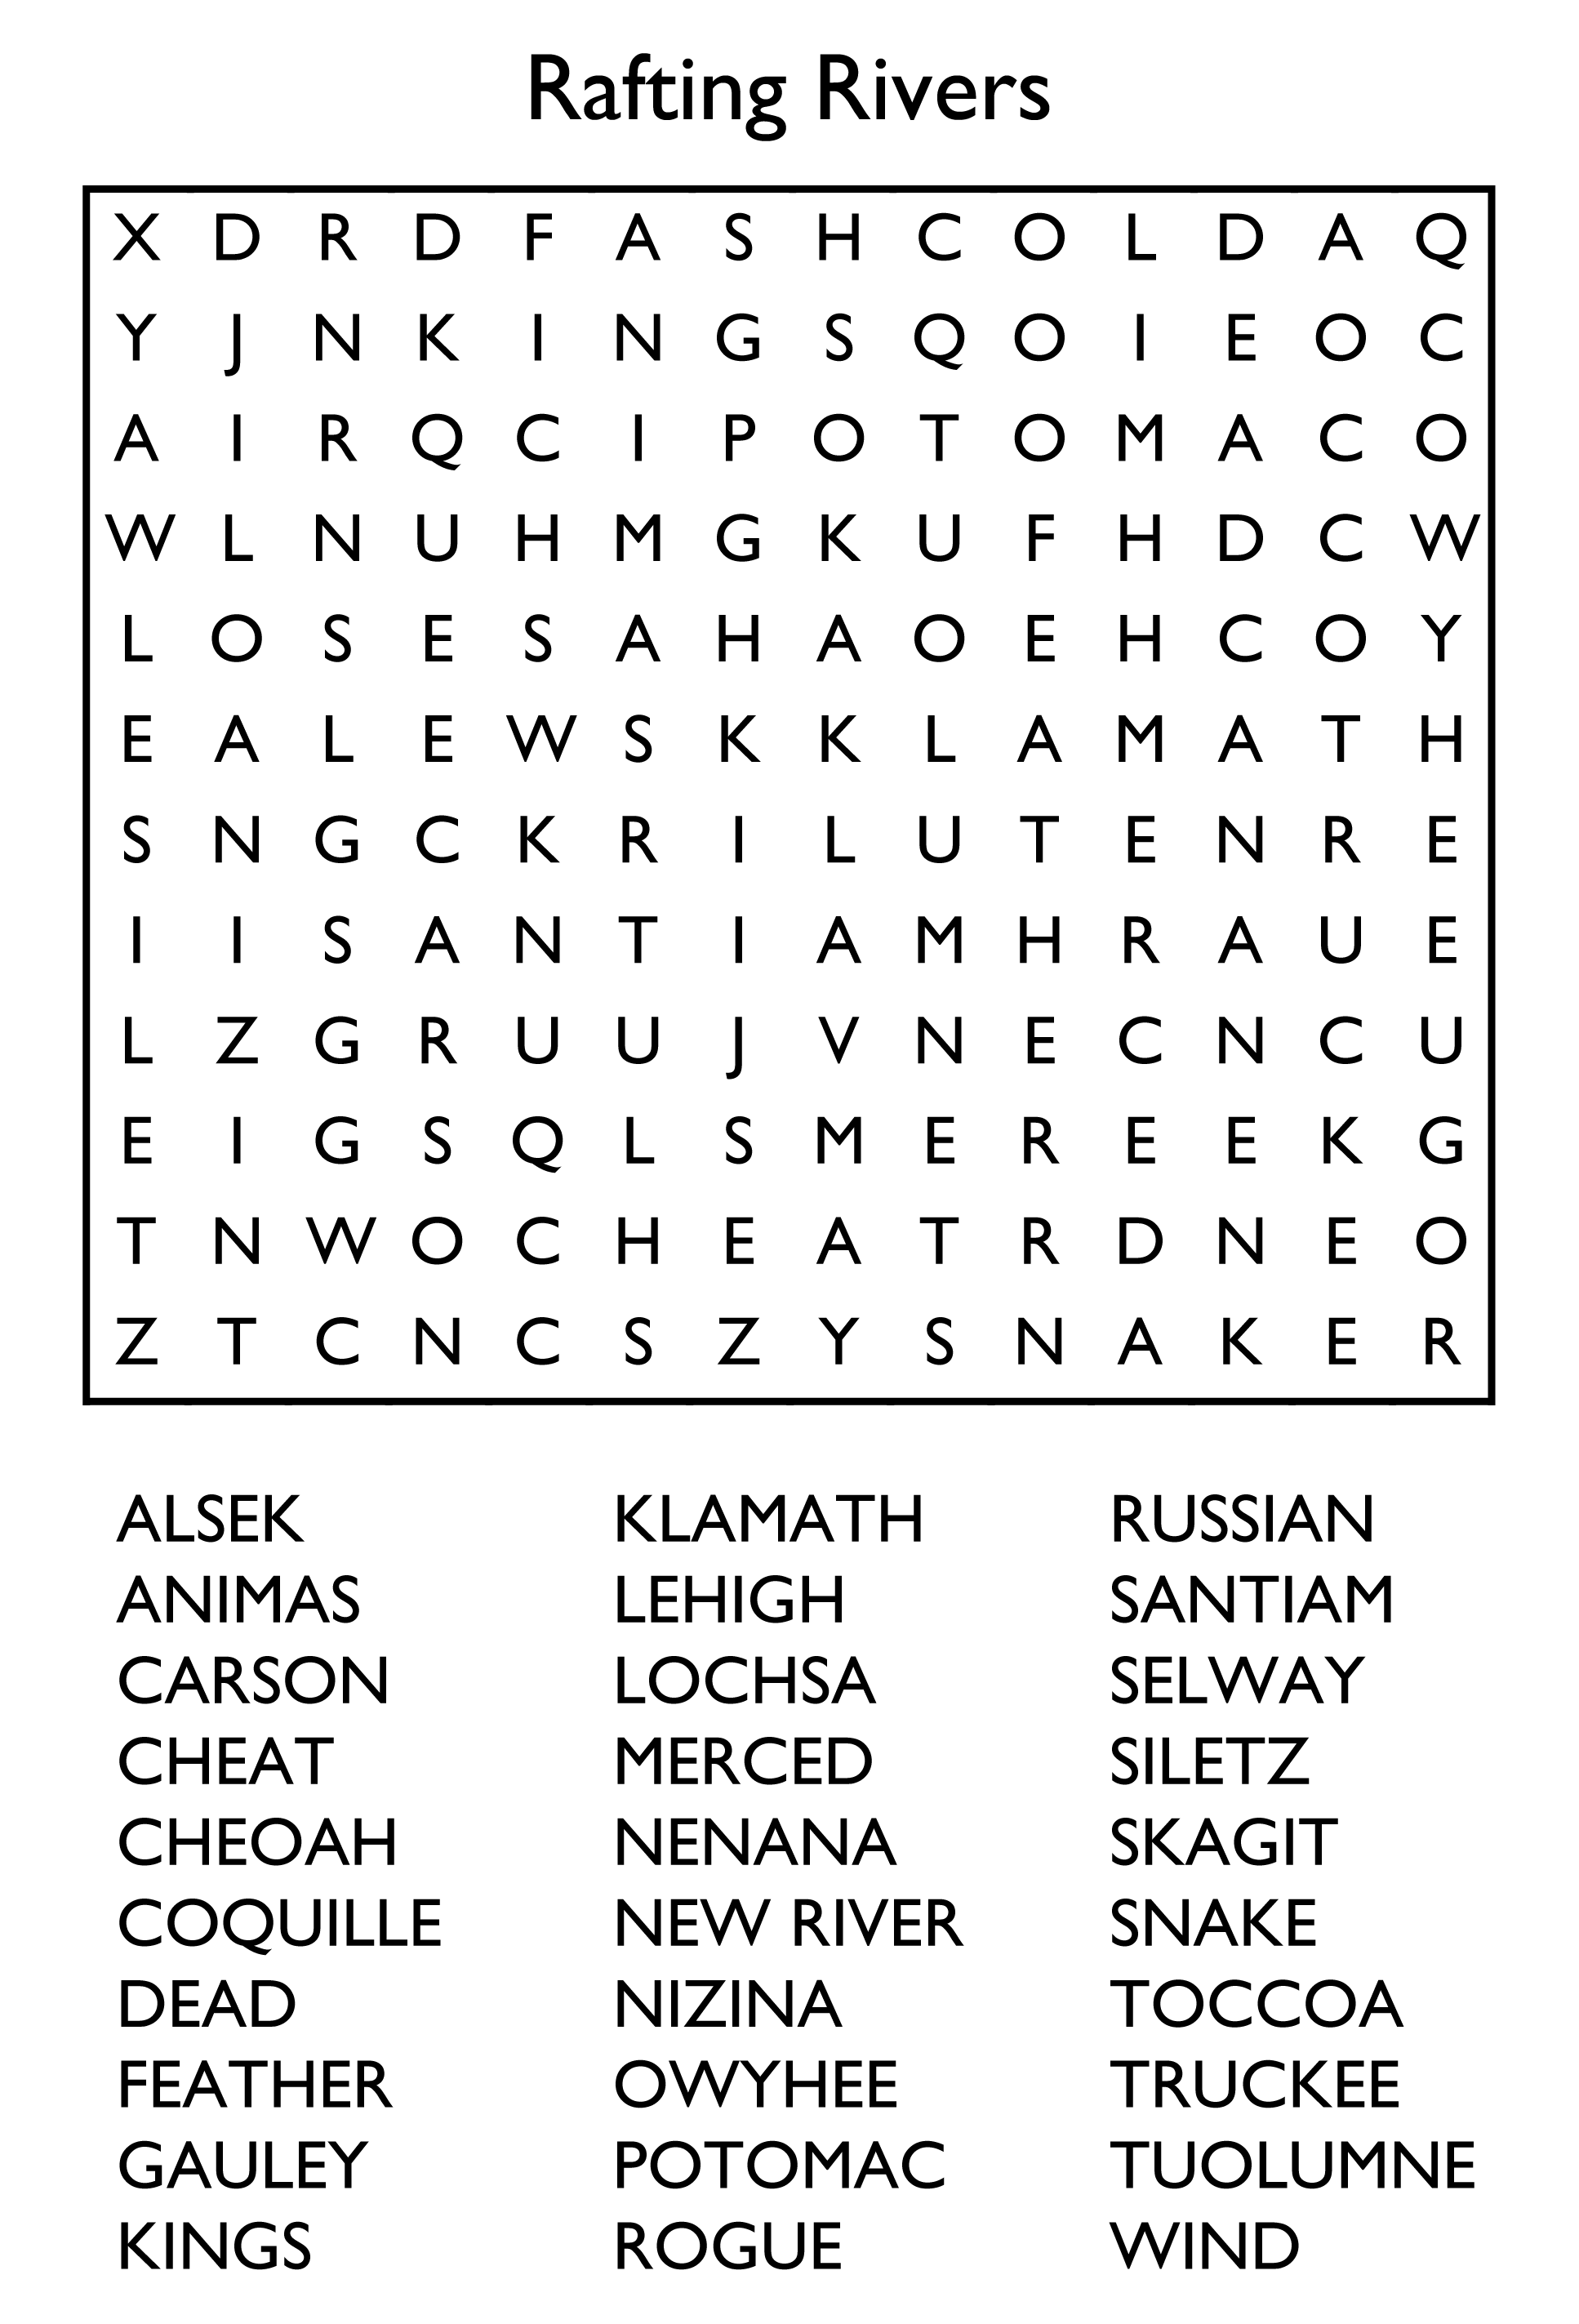 Free Printable Word Searches For Adults Large Print Online Discount Shop For Electronics Apparel Toys Books Games Computers Shoes Jewelry Watches Baby Products Sports Outdoors Office Products Bed Bath Furniture Tools Hardware